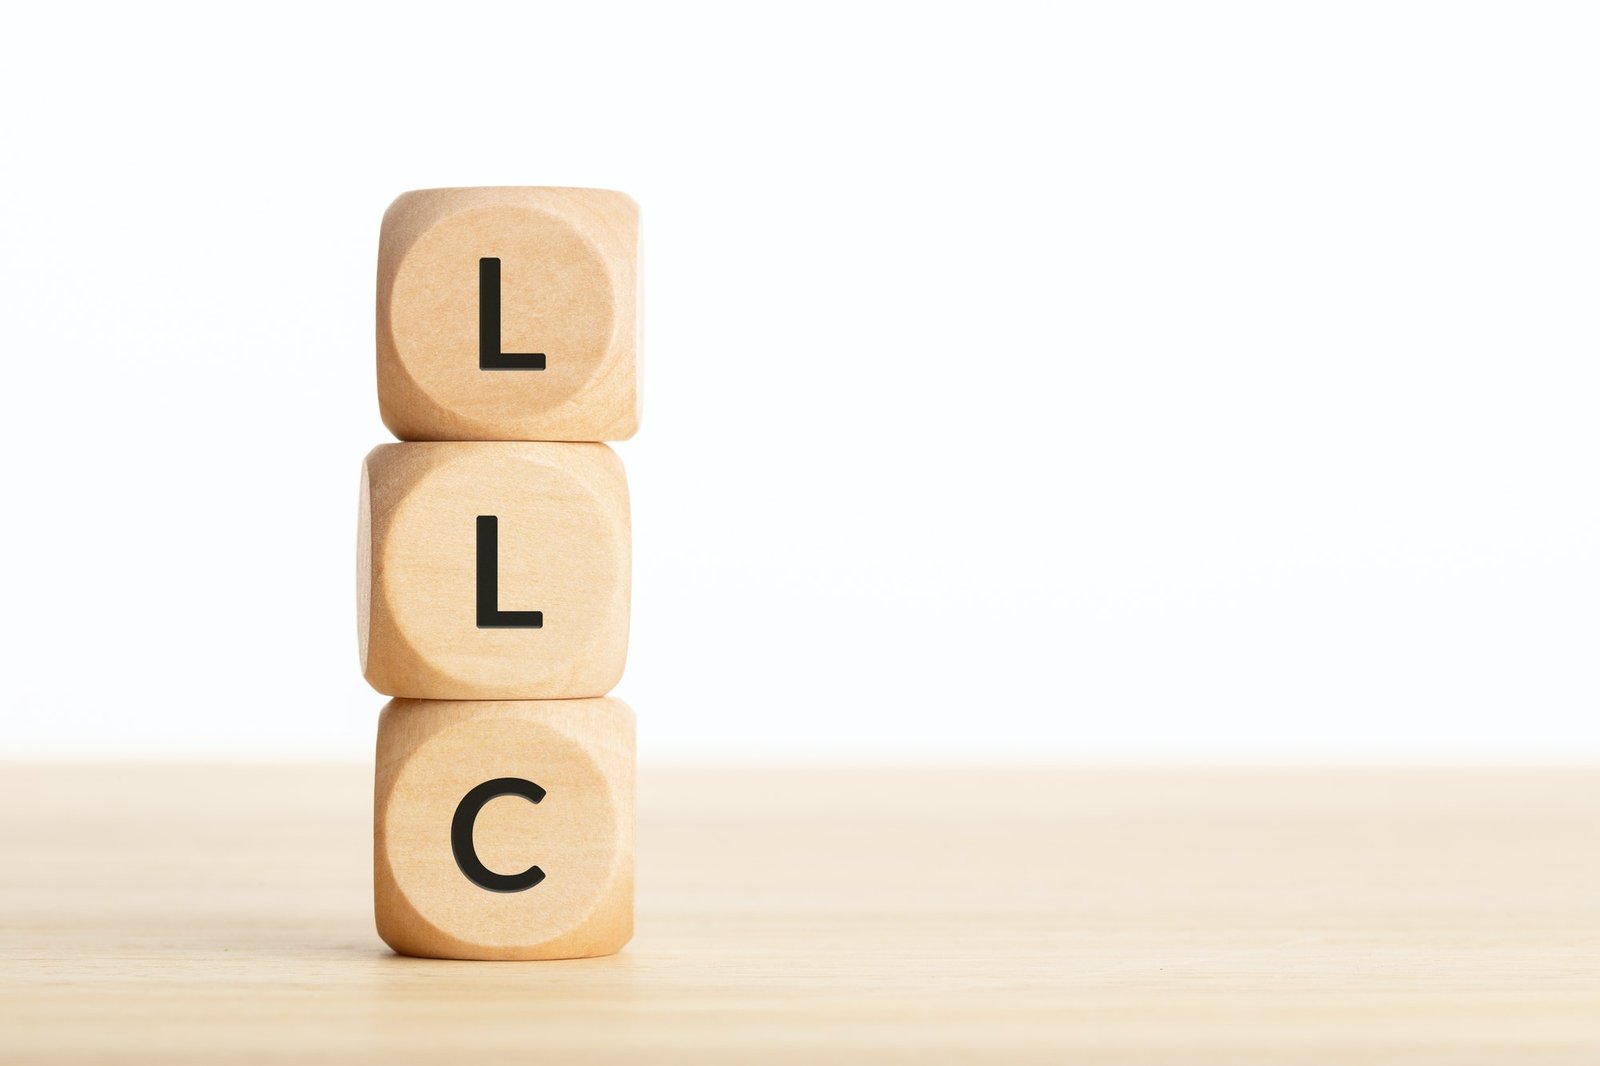 LLC or Limited Liability Company concept